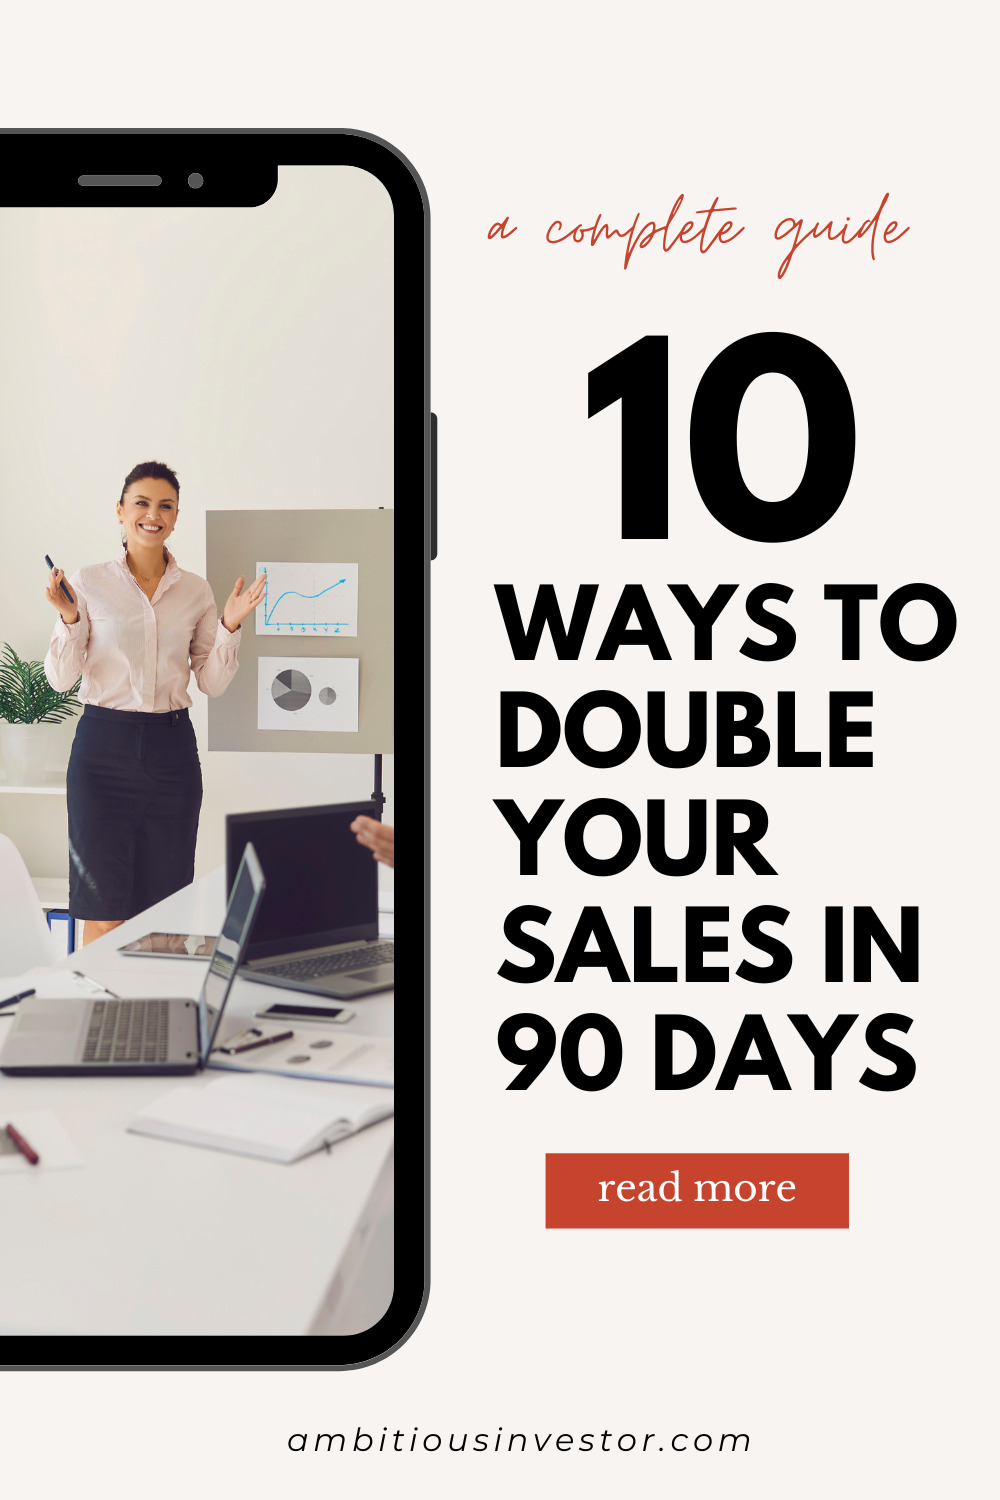 10 Ways to Double Your Sales in 90 Days